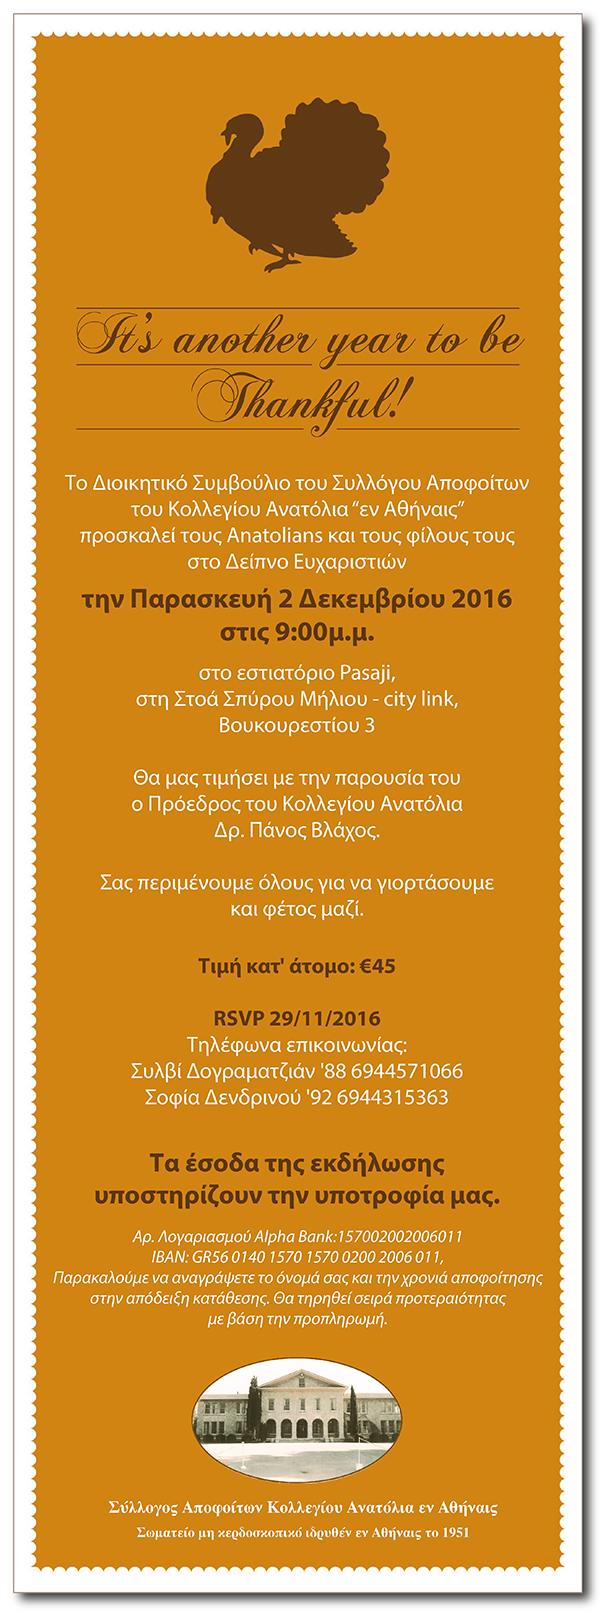 save-the-date-athens-thanksgiving-2016